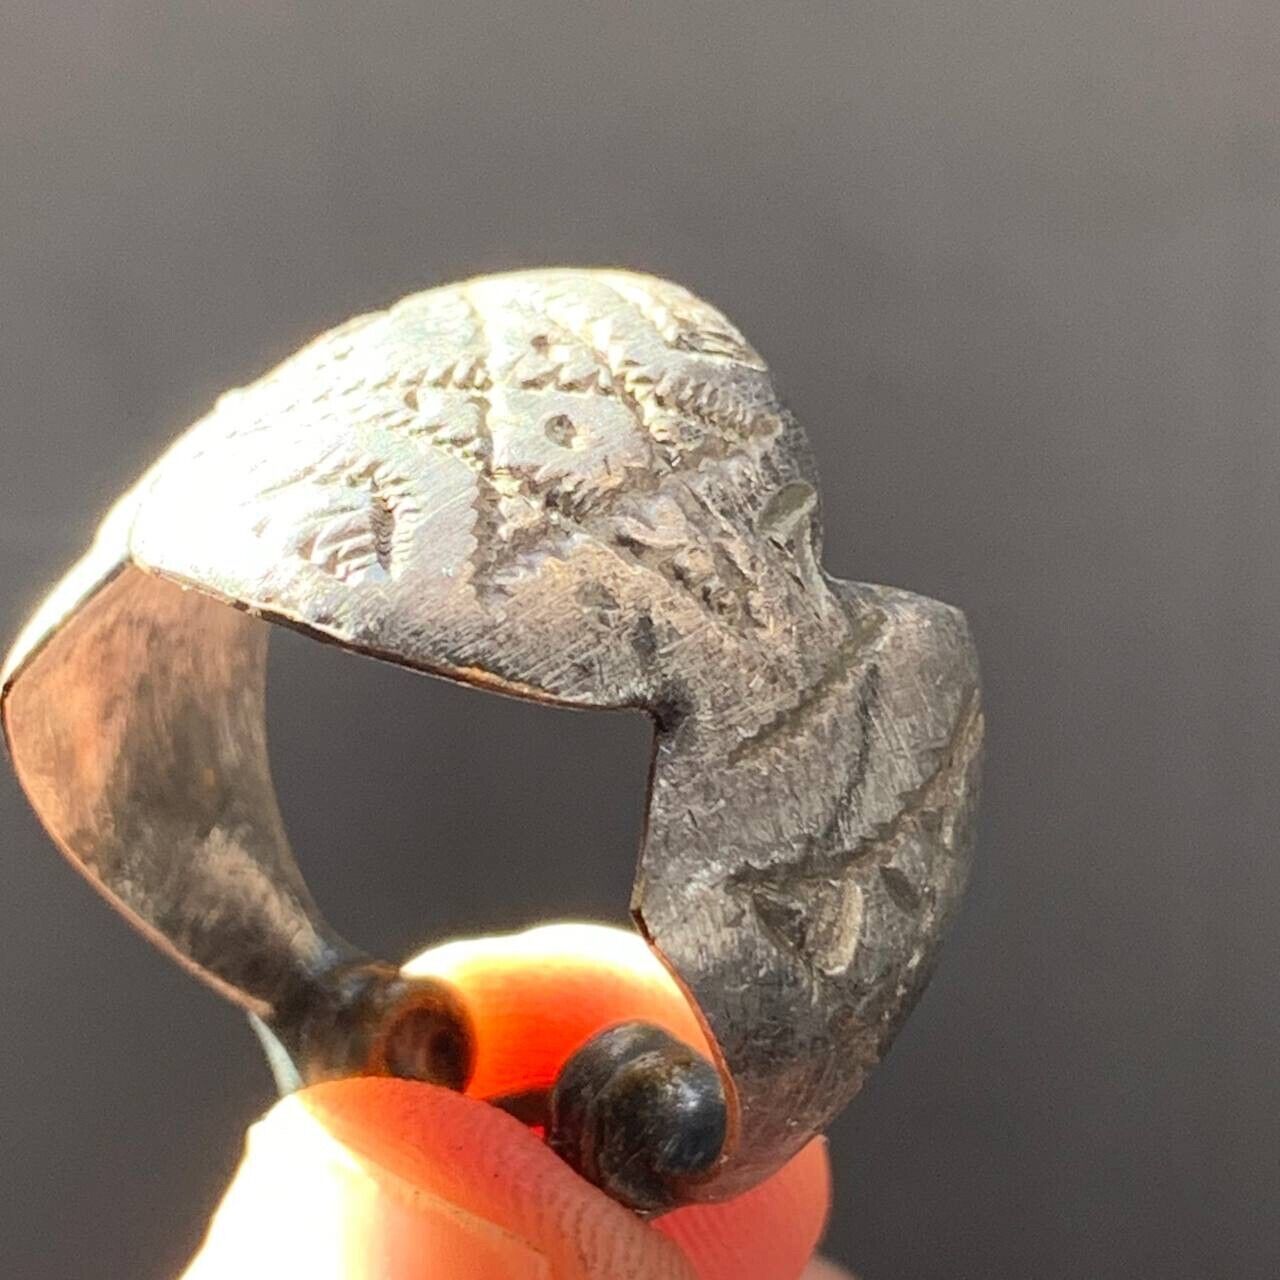 VERY RARE ANCIENT ANTIQUE SILVER COLOR RING VIKING ENGRAVED ARTIFACT AUTHENTIC